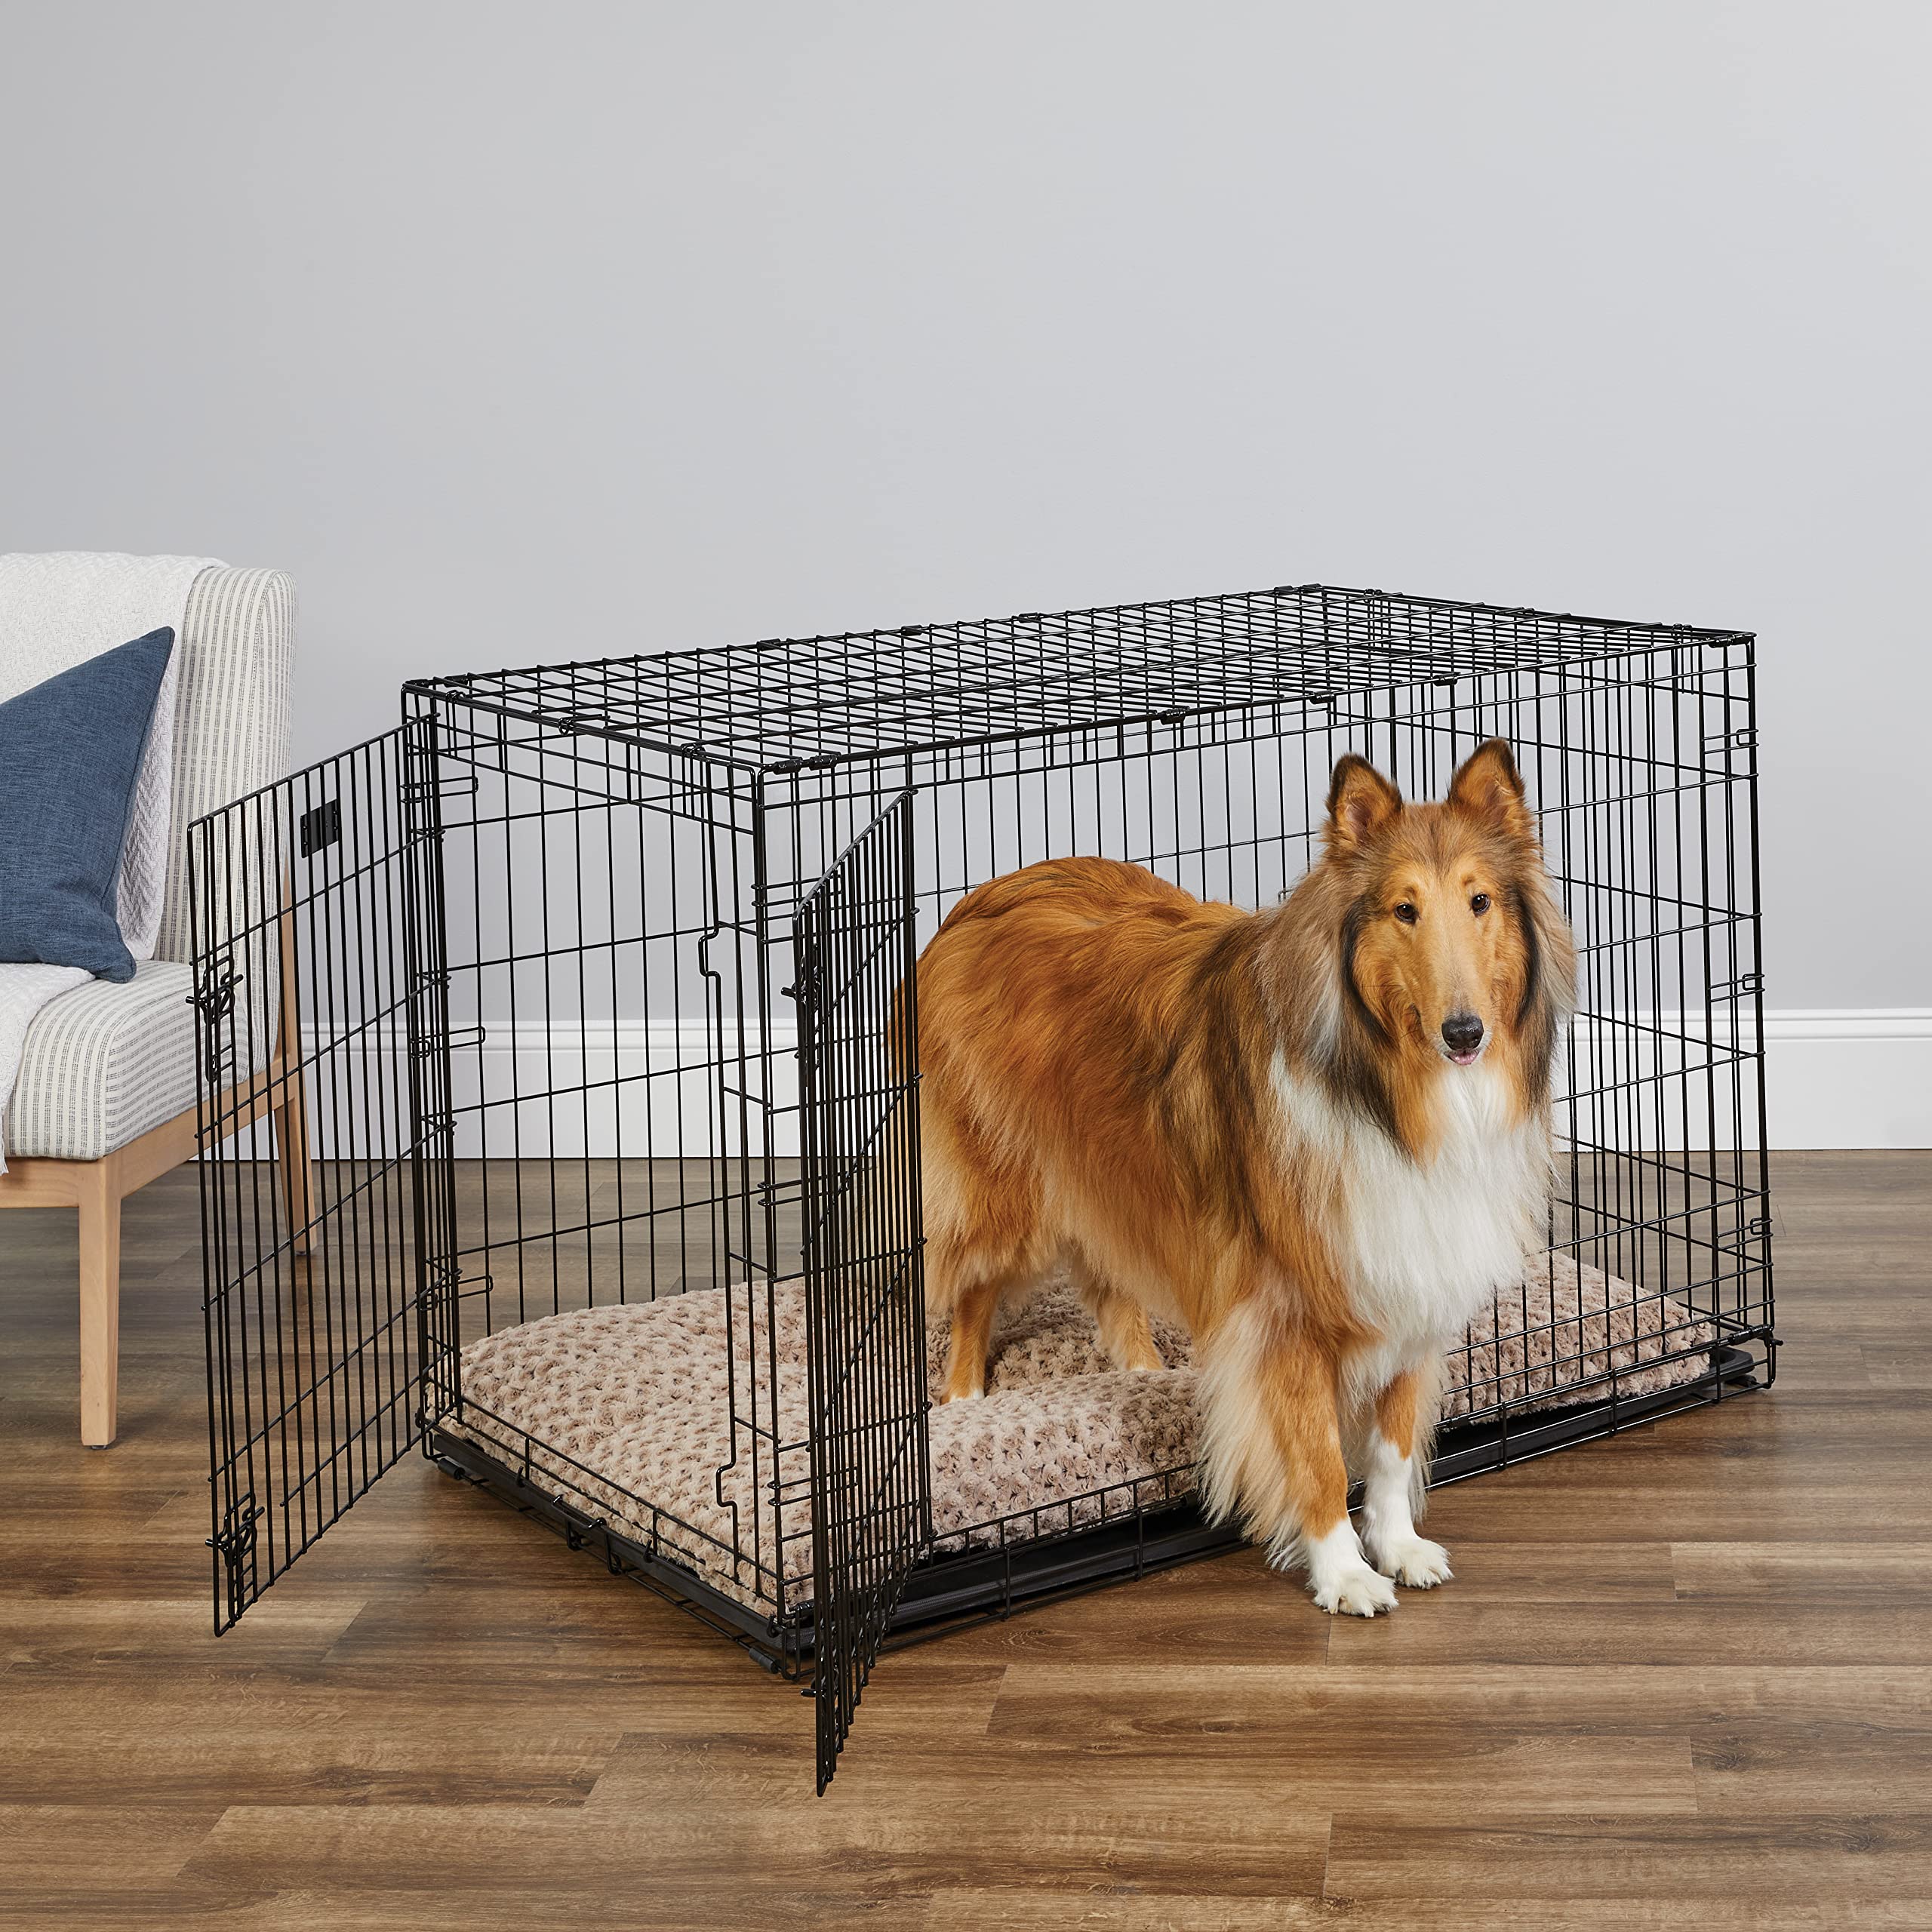 MidWest Homes for Pets Newly EnhancedA Double Door icrate Dog crate, Includes Leak-Proof Pan, Floor Protecting Feet, Divider Pan